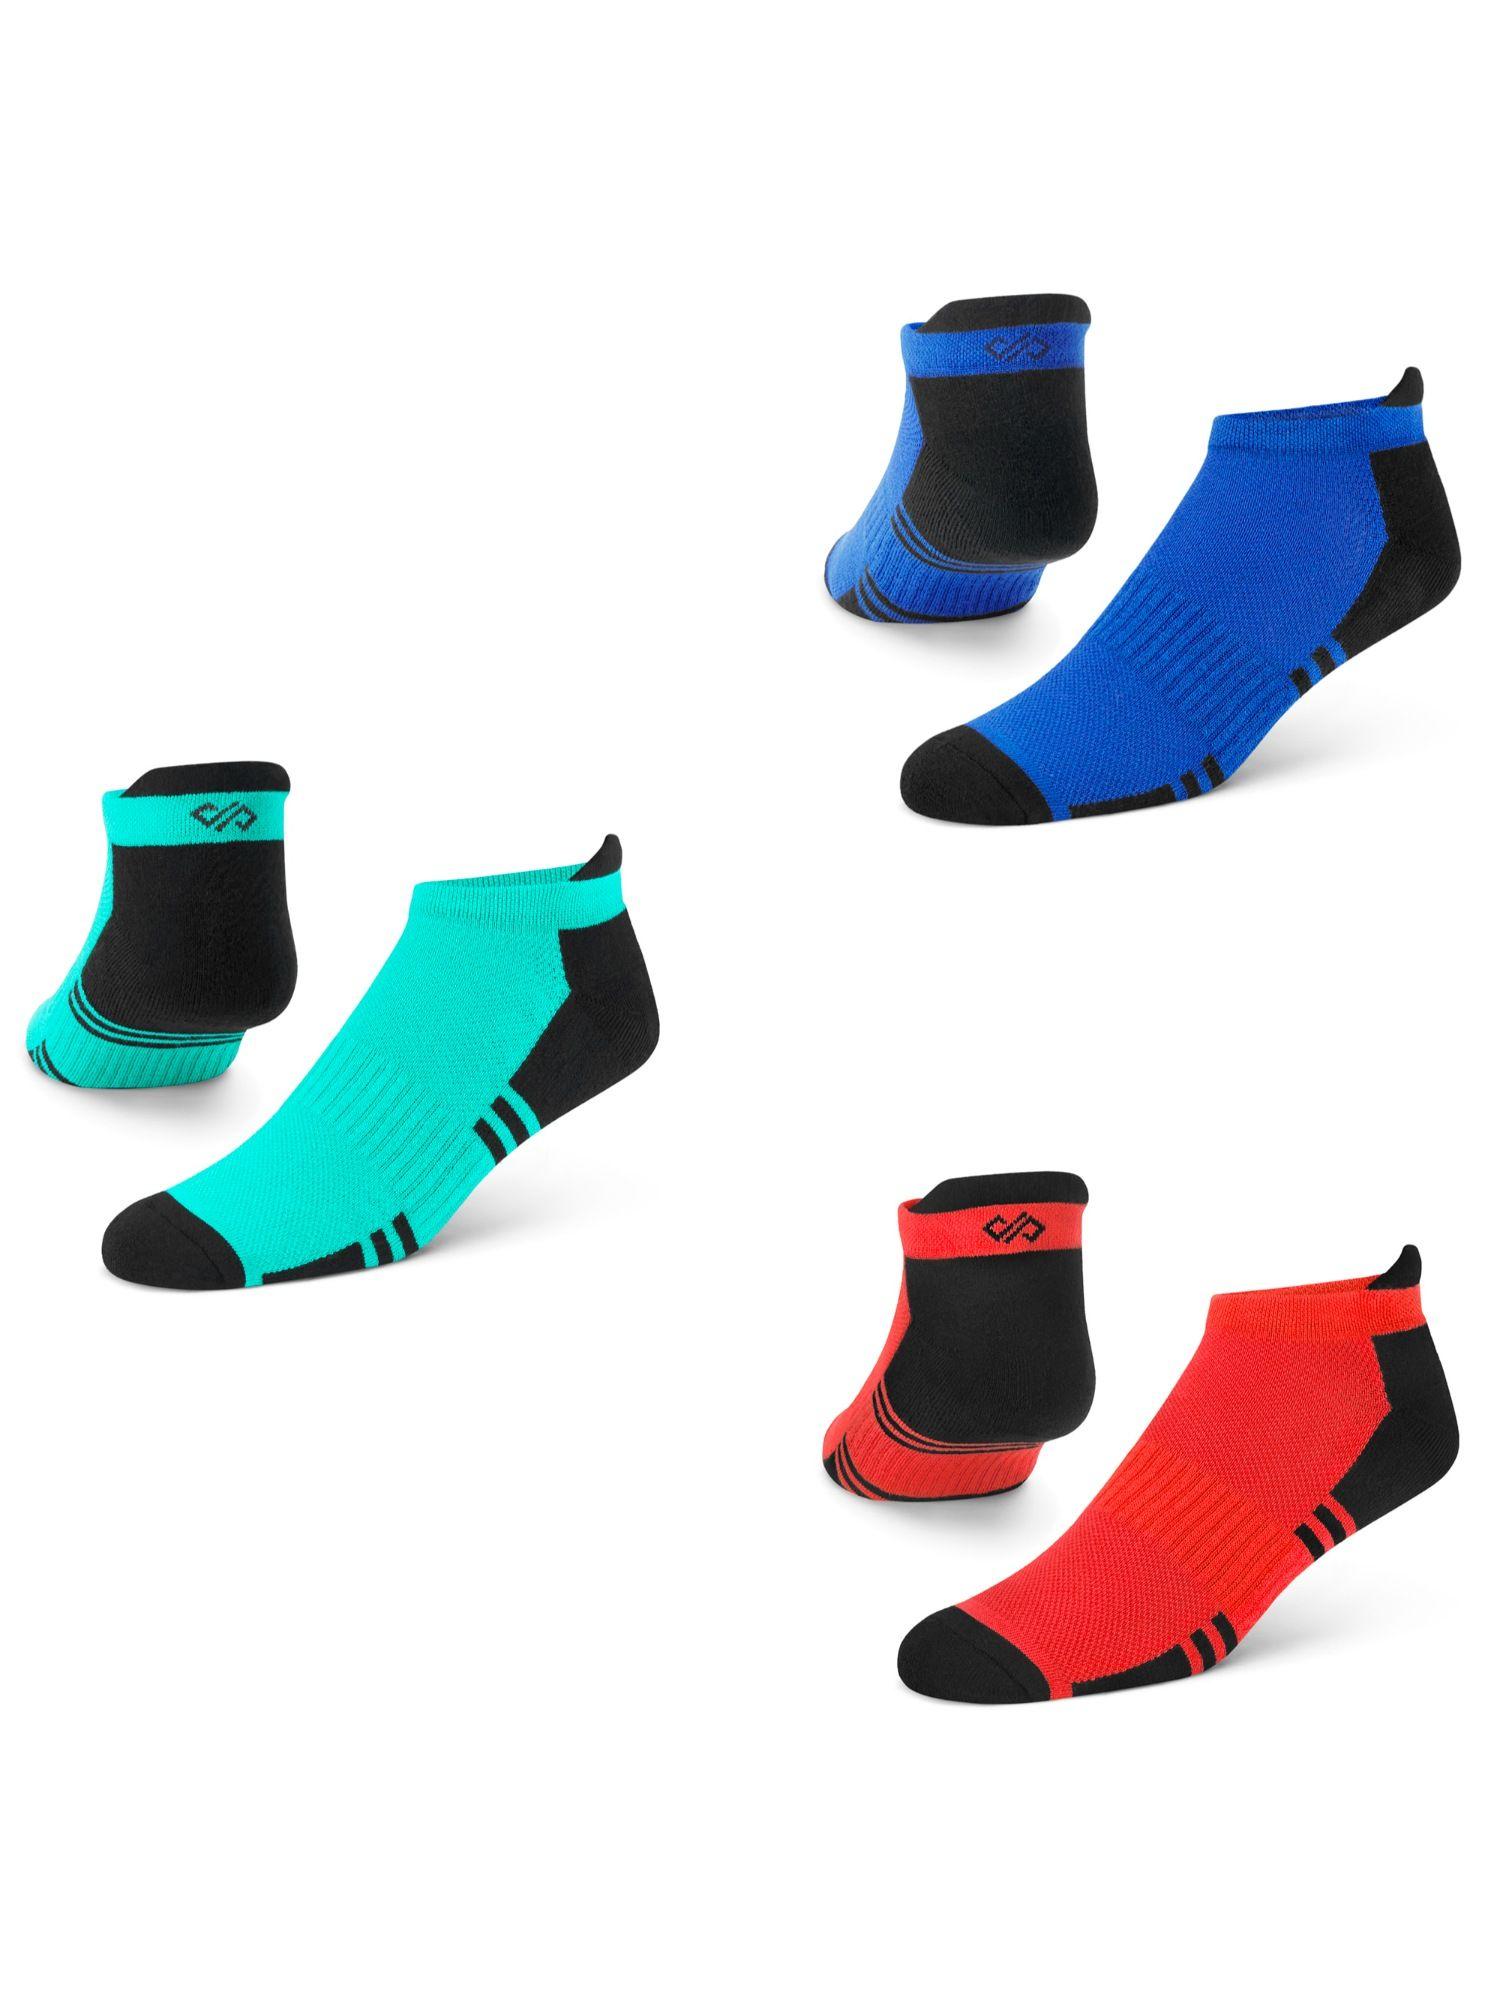 dual solid multicolor men bamboo ankle length socks - free size - pack of 3 pairs